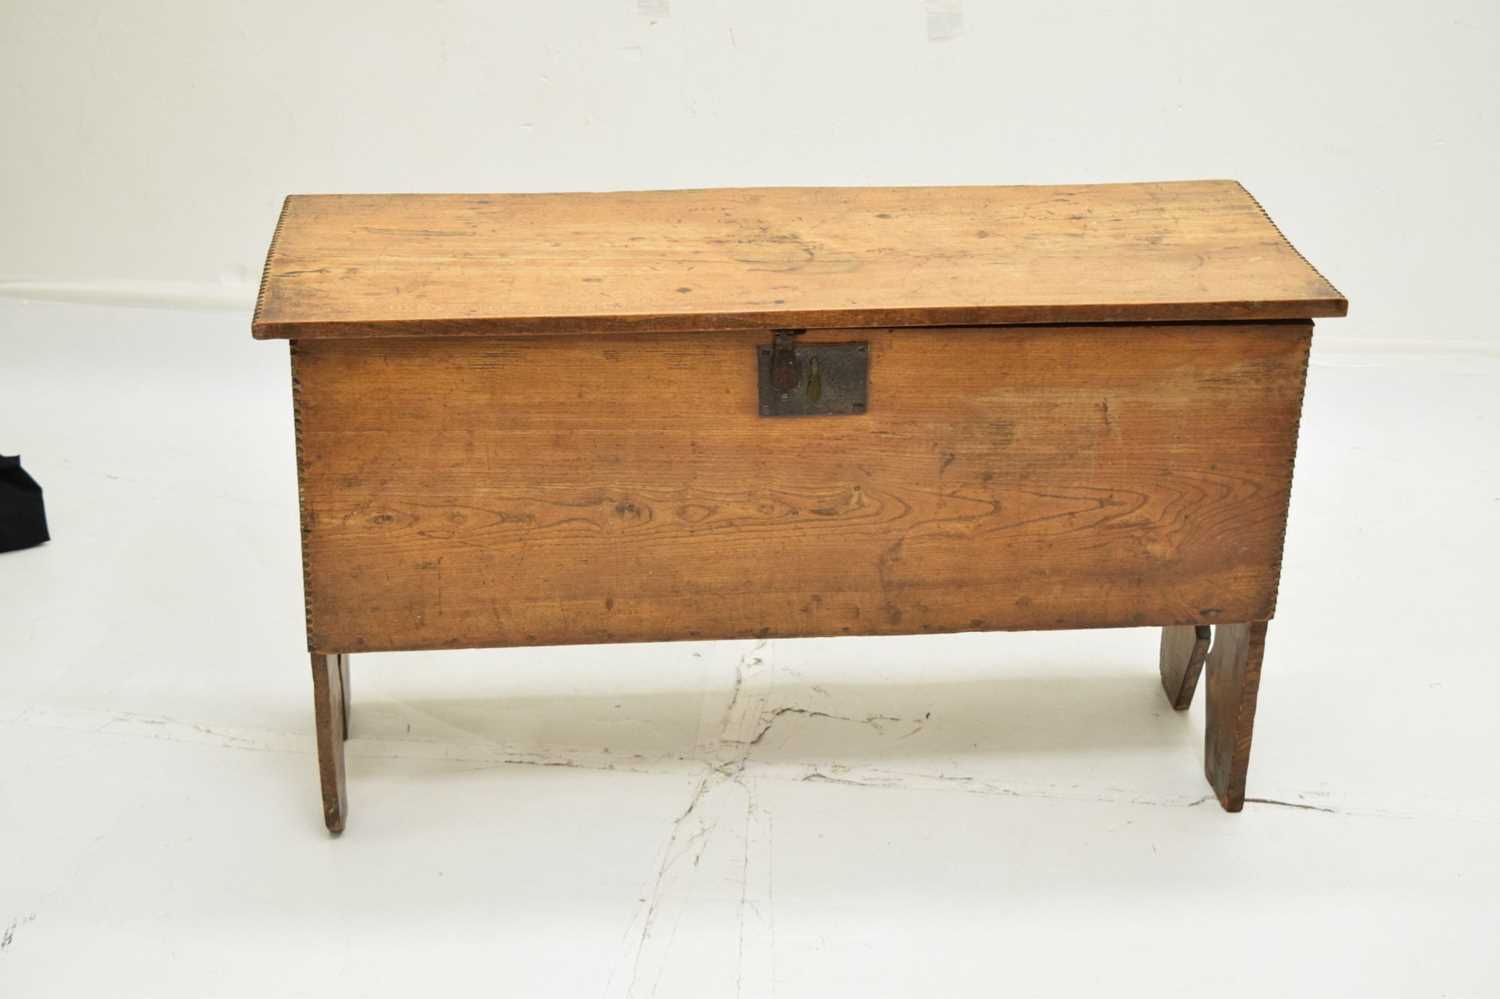 17th century elm six-plank coffer or bedding chest - Image 3 of 6